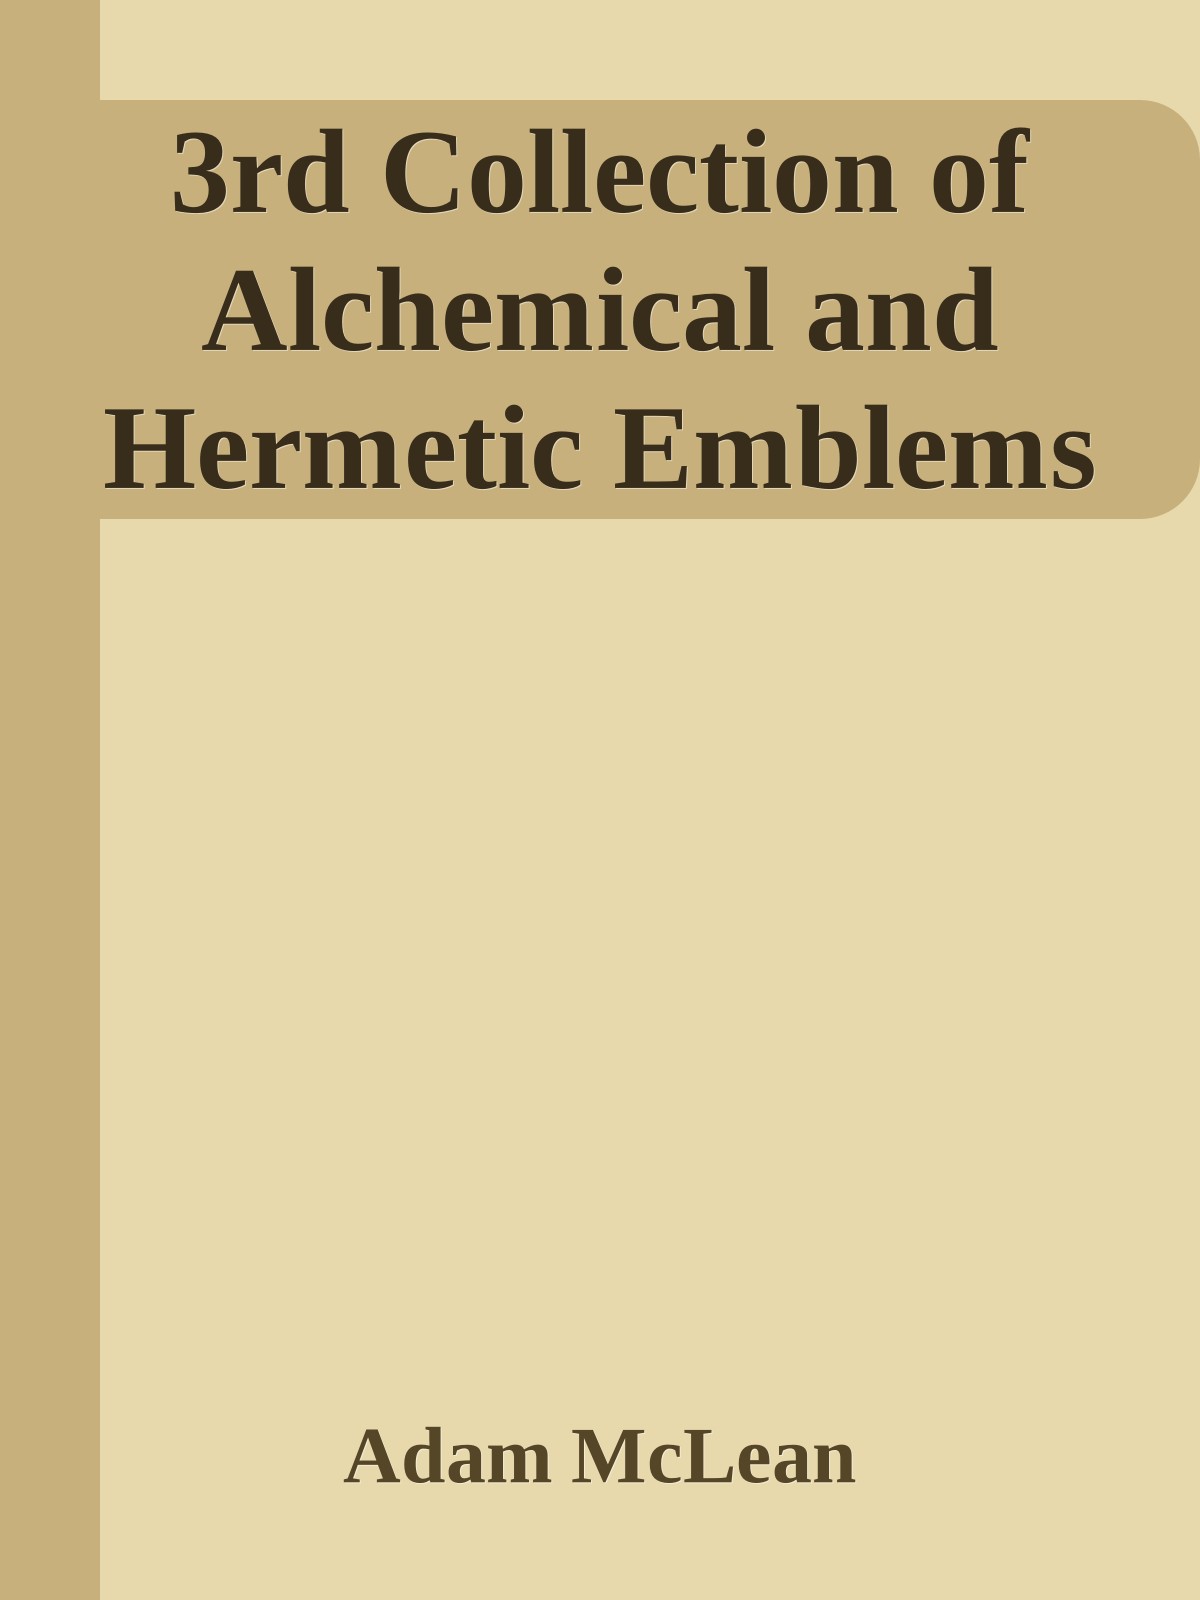 3rd Collection of Alchemical and Hermetic Emblems